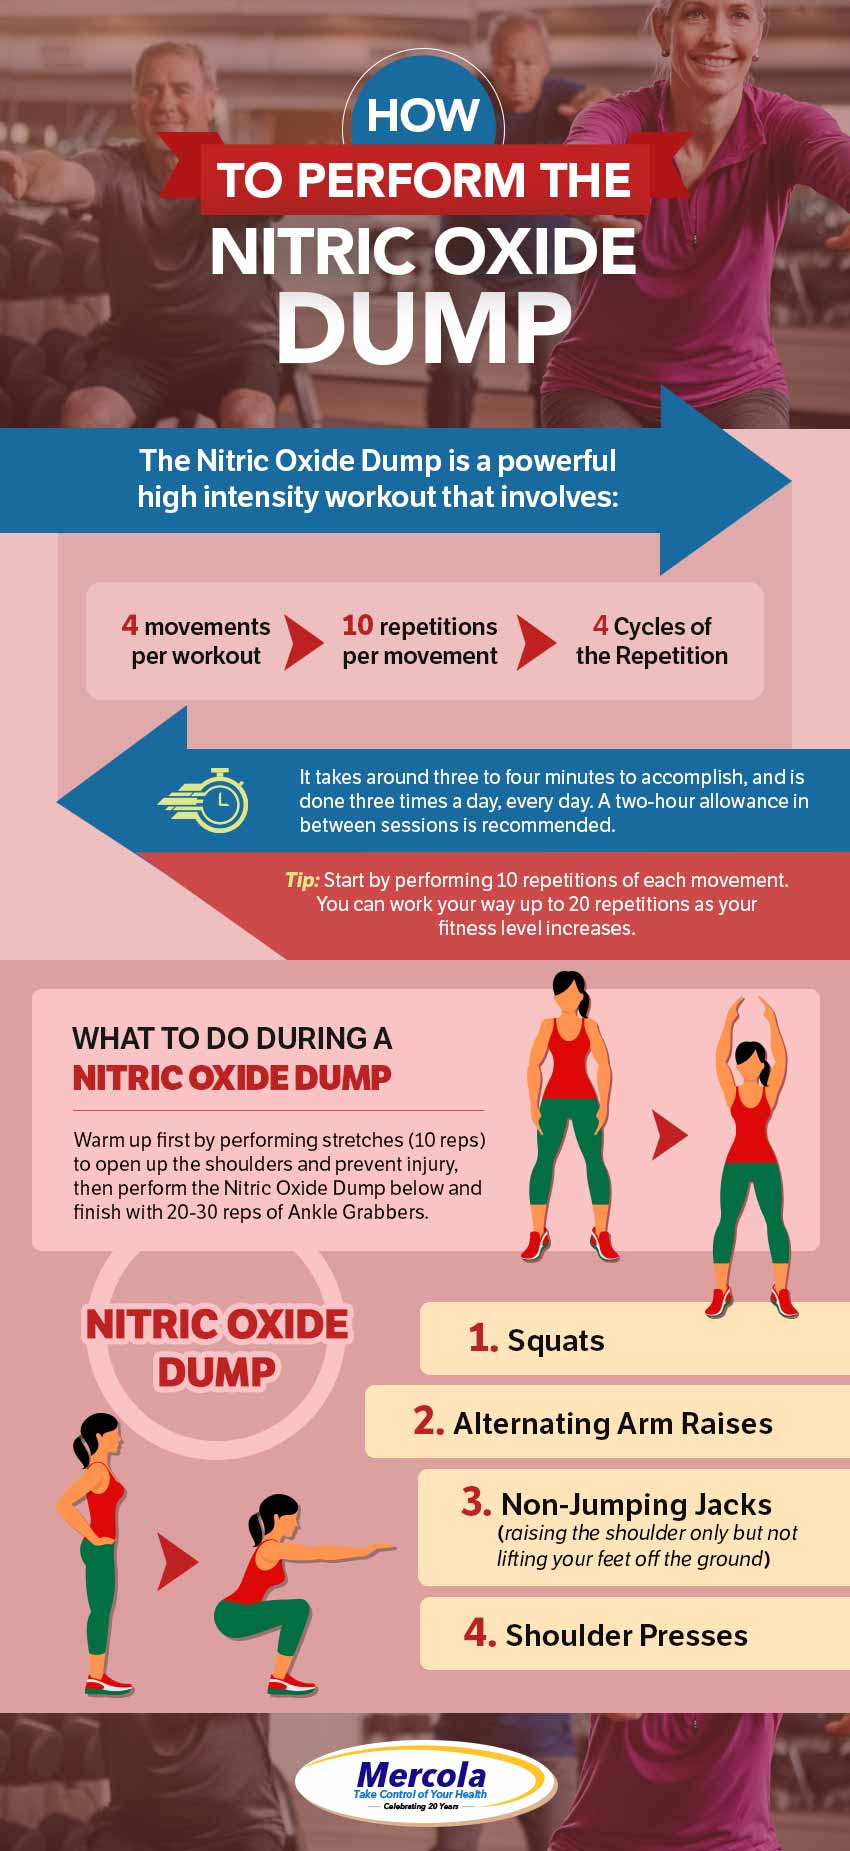 How to Perform Nitric Oxide Dump